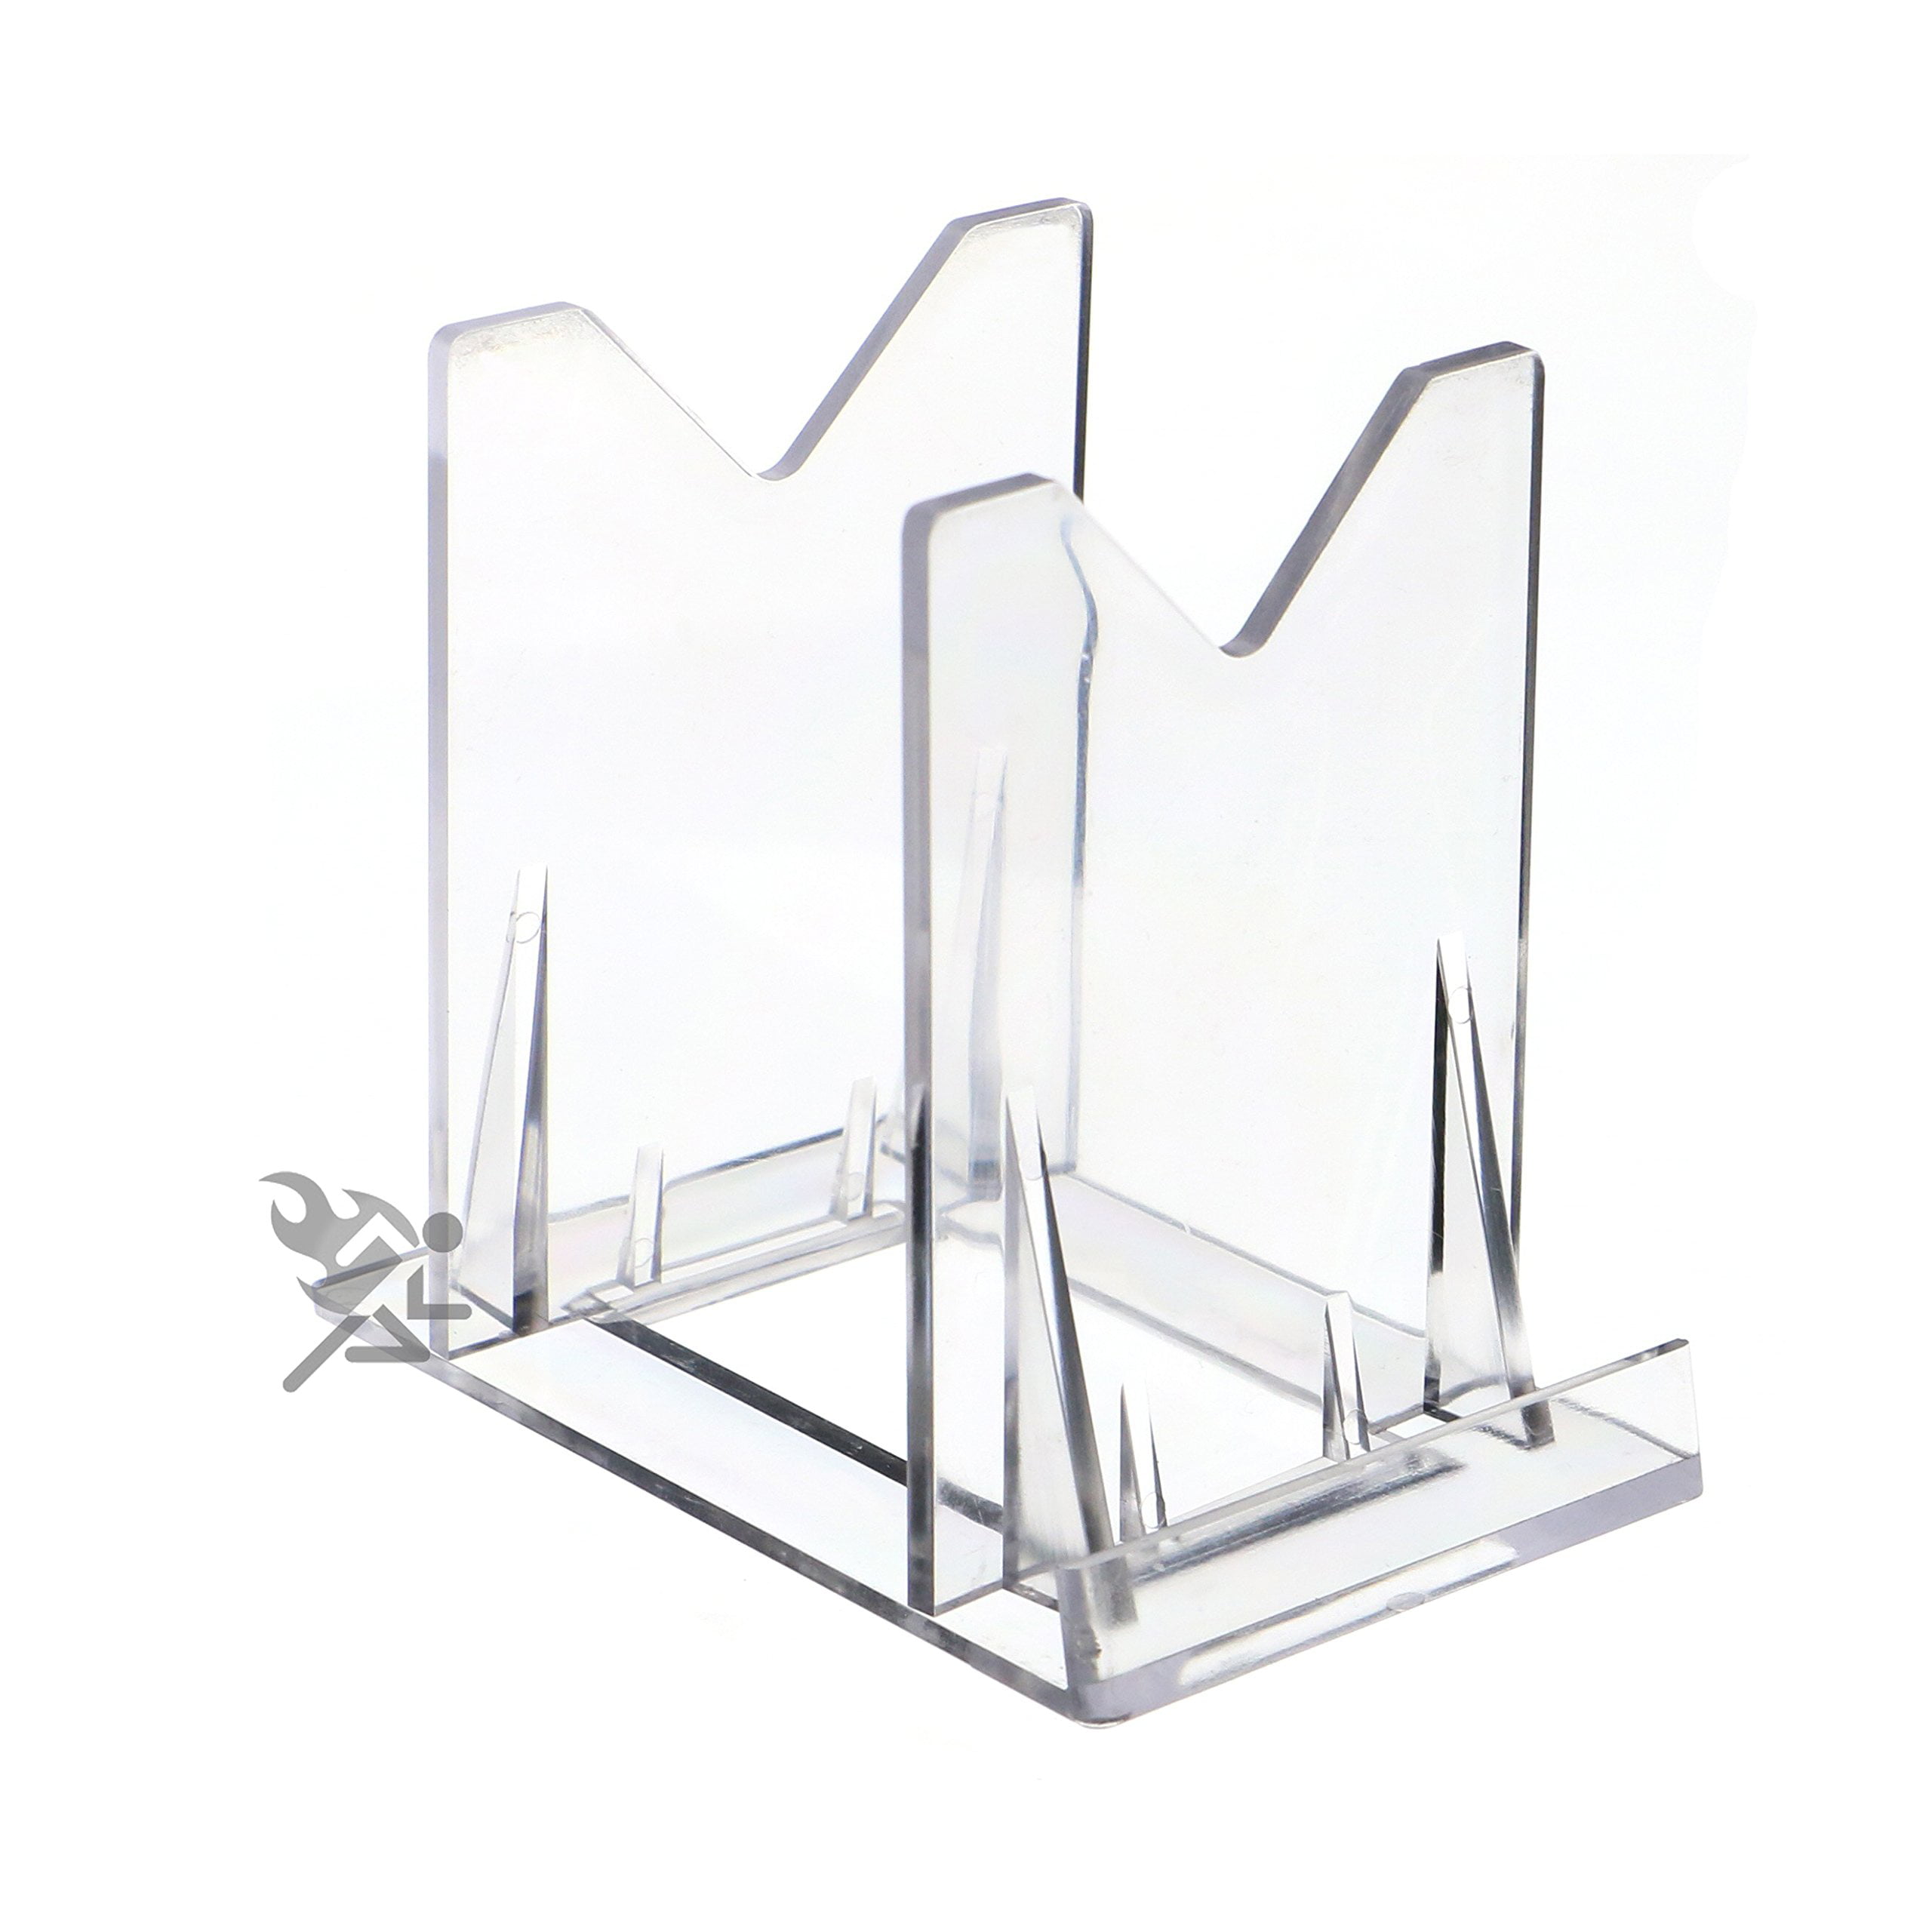 *5 Fishing Lure Display Stand Easels